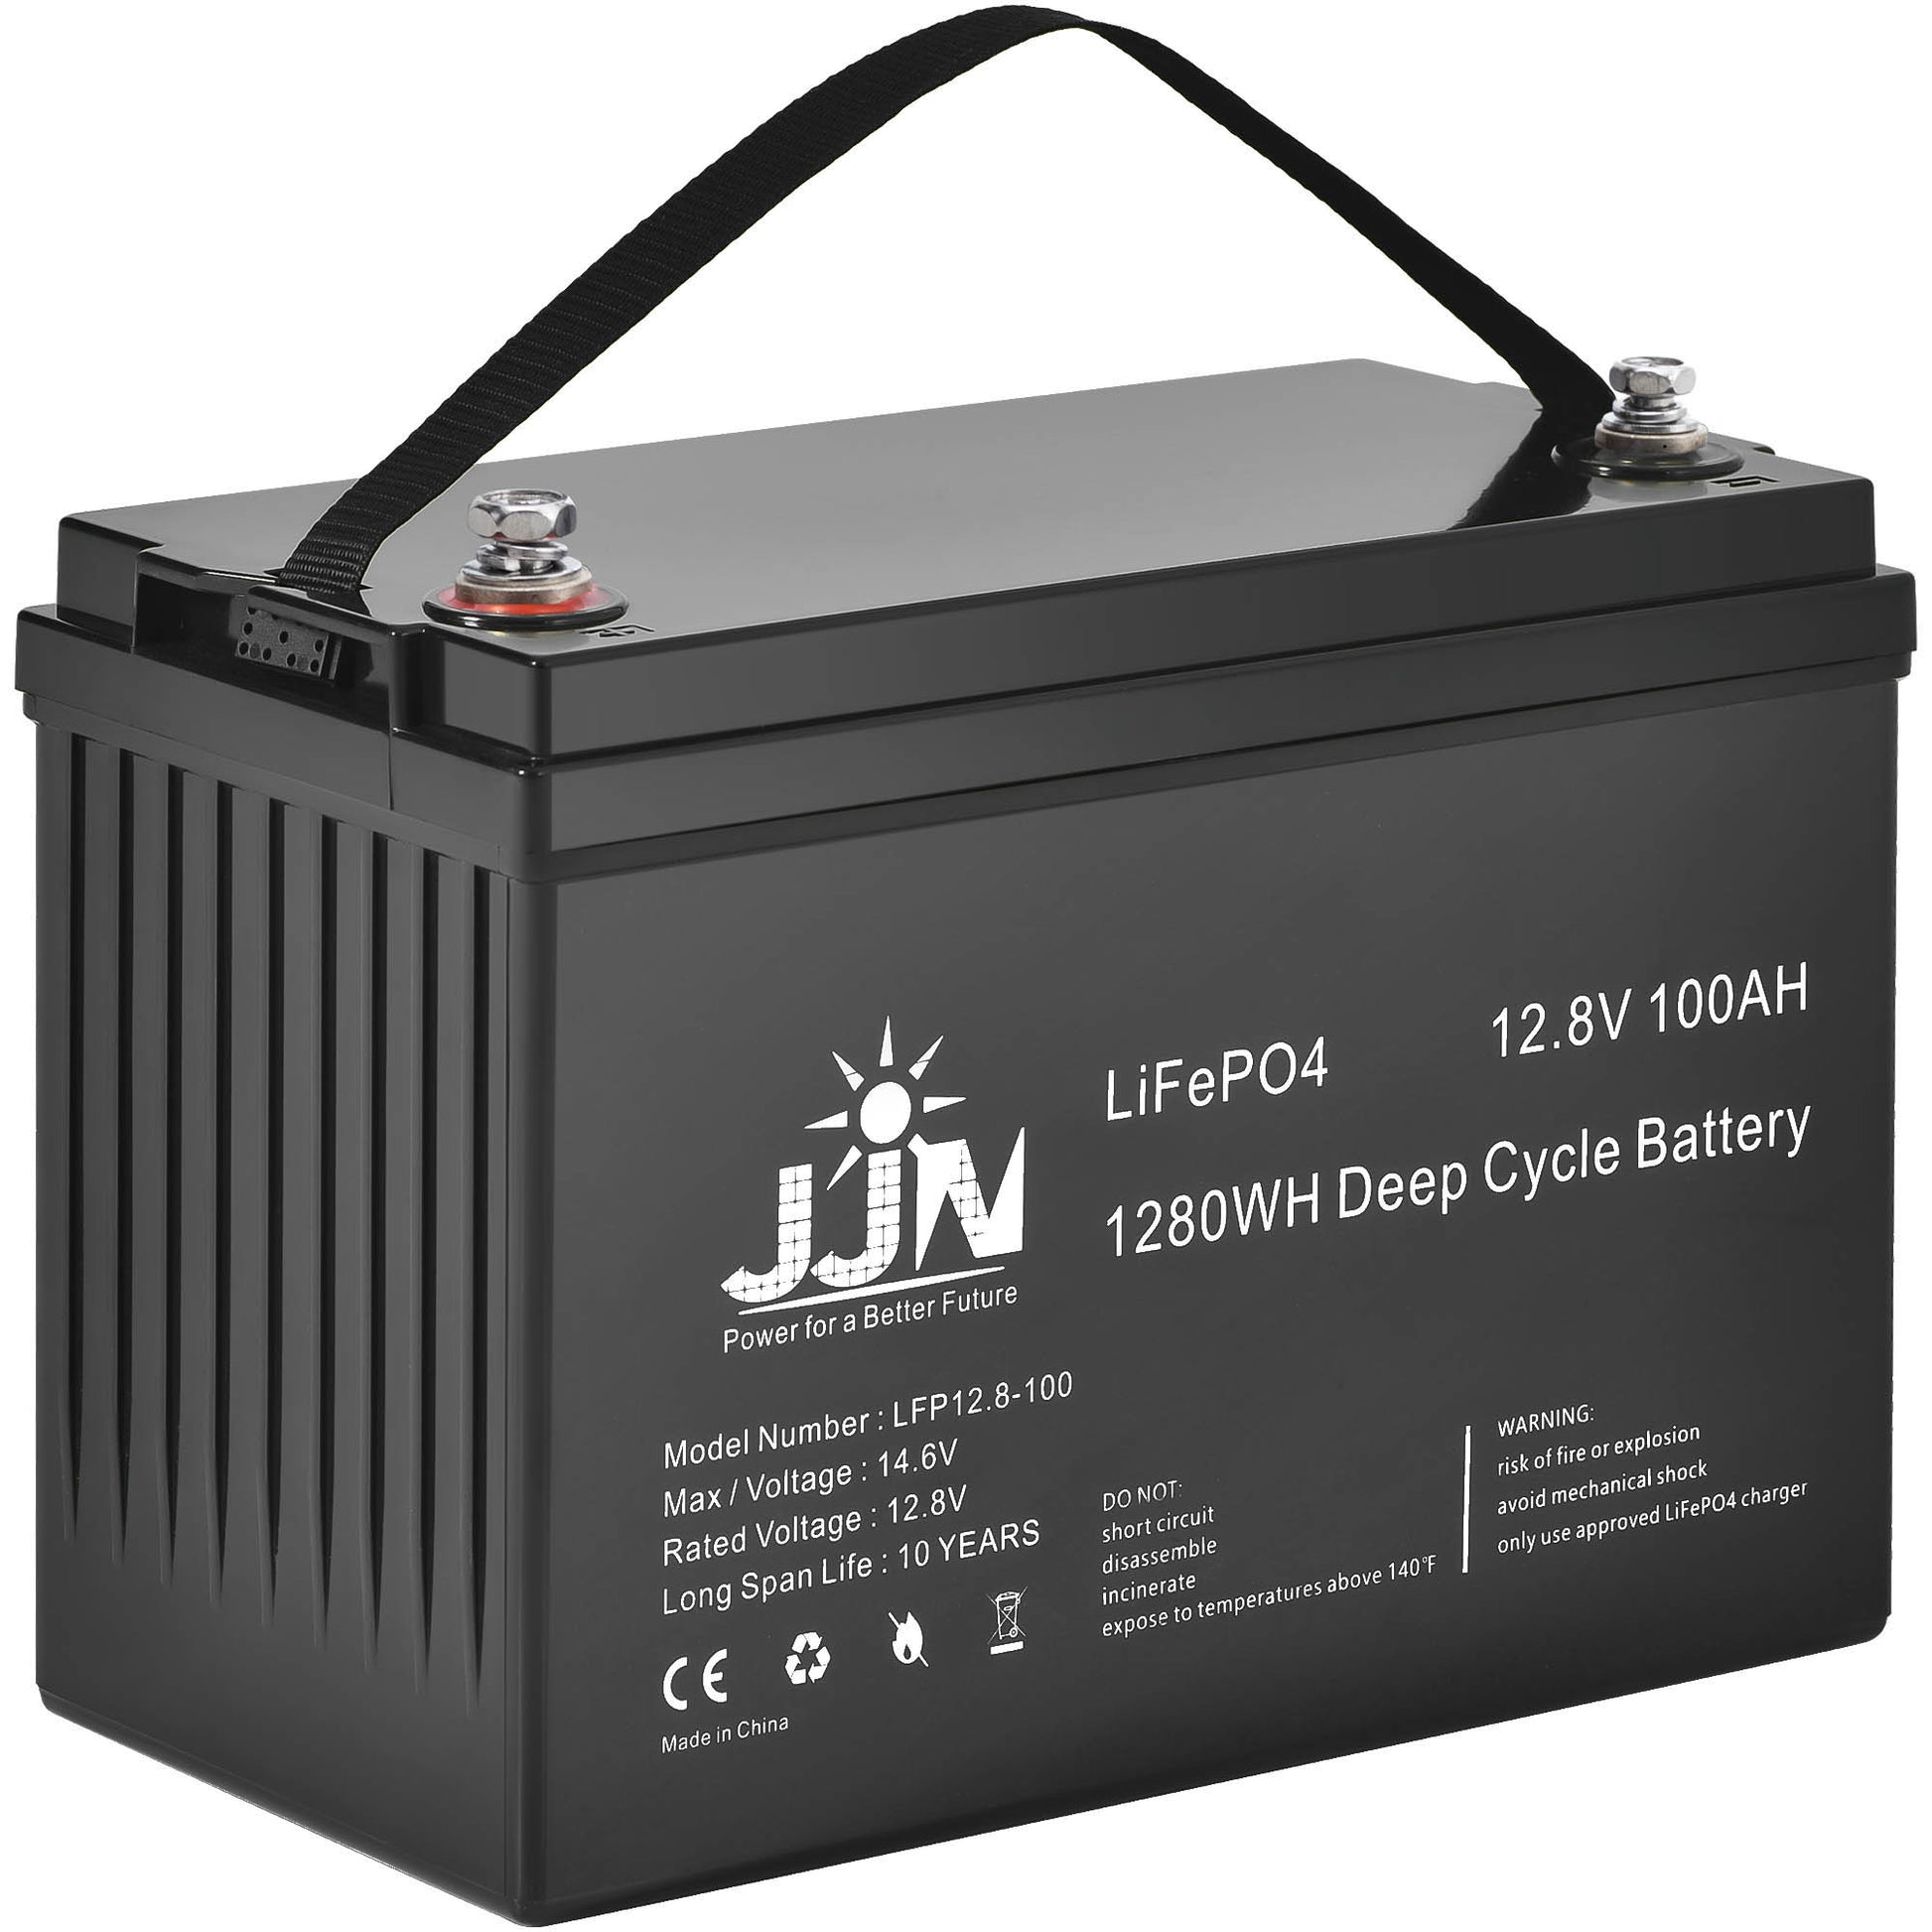 Lithium Battery 12V 100Ah LiFePO4 Batteries with 100A BMS, Deep Cycle  Rechargeable Lithium Iron Phosphate Battery, for Solar, Marine, Trolling  Motor